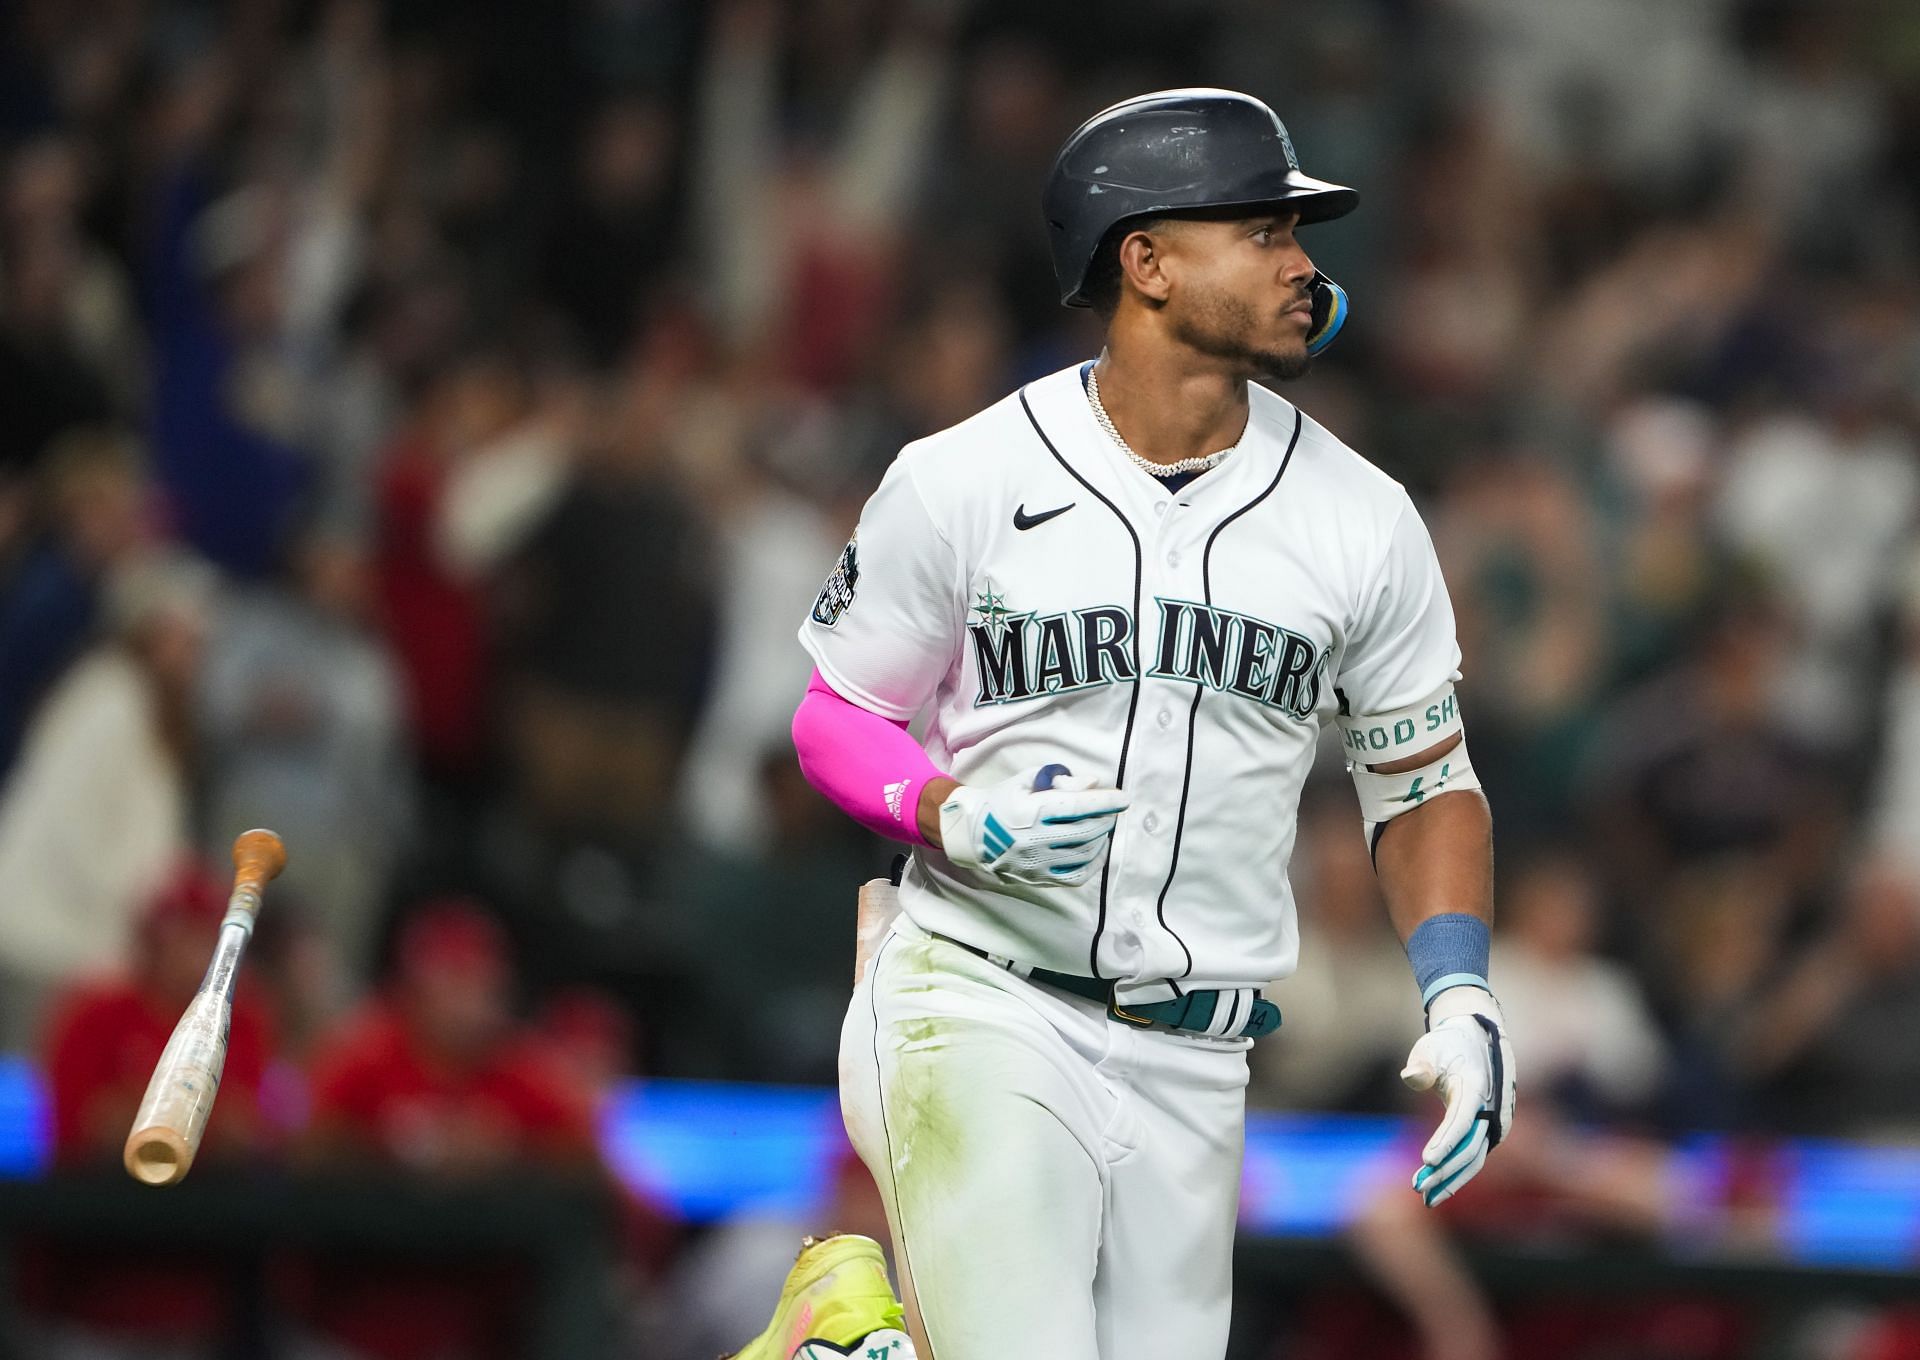 Julio Rodriguez enters 30-30 club as game-tying homer assures Mariners fans of bright future